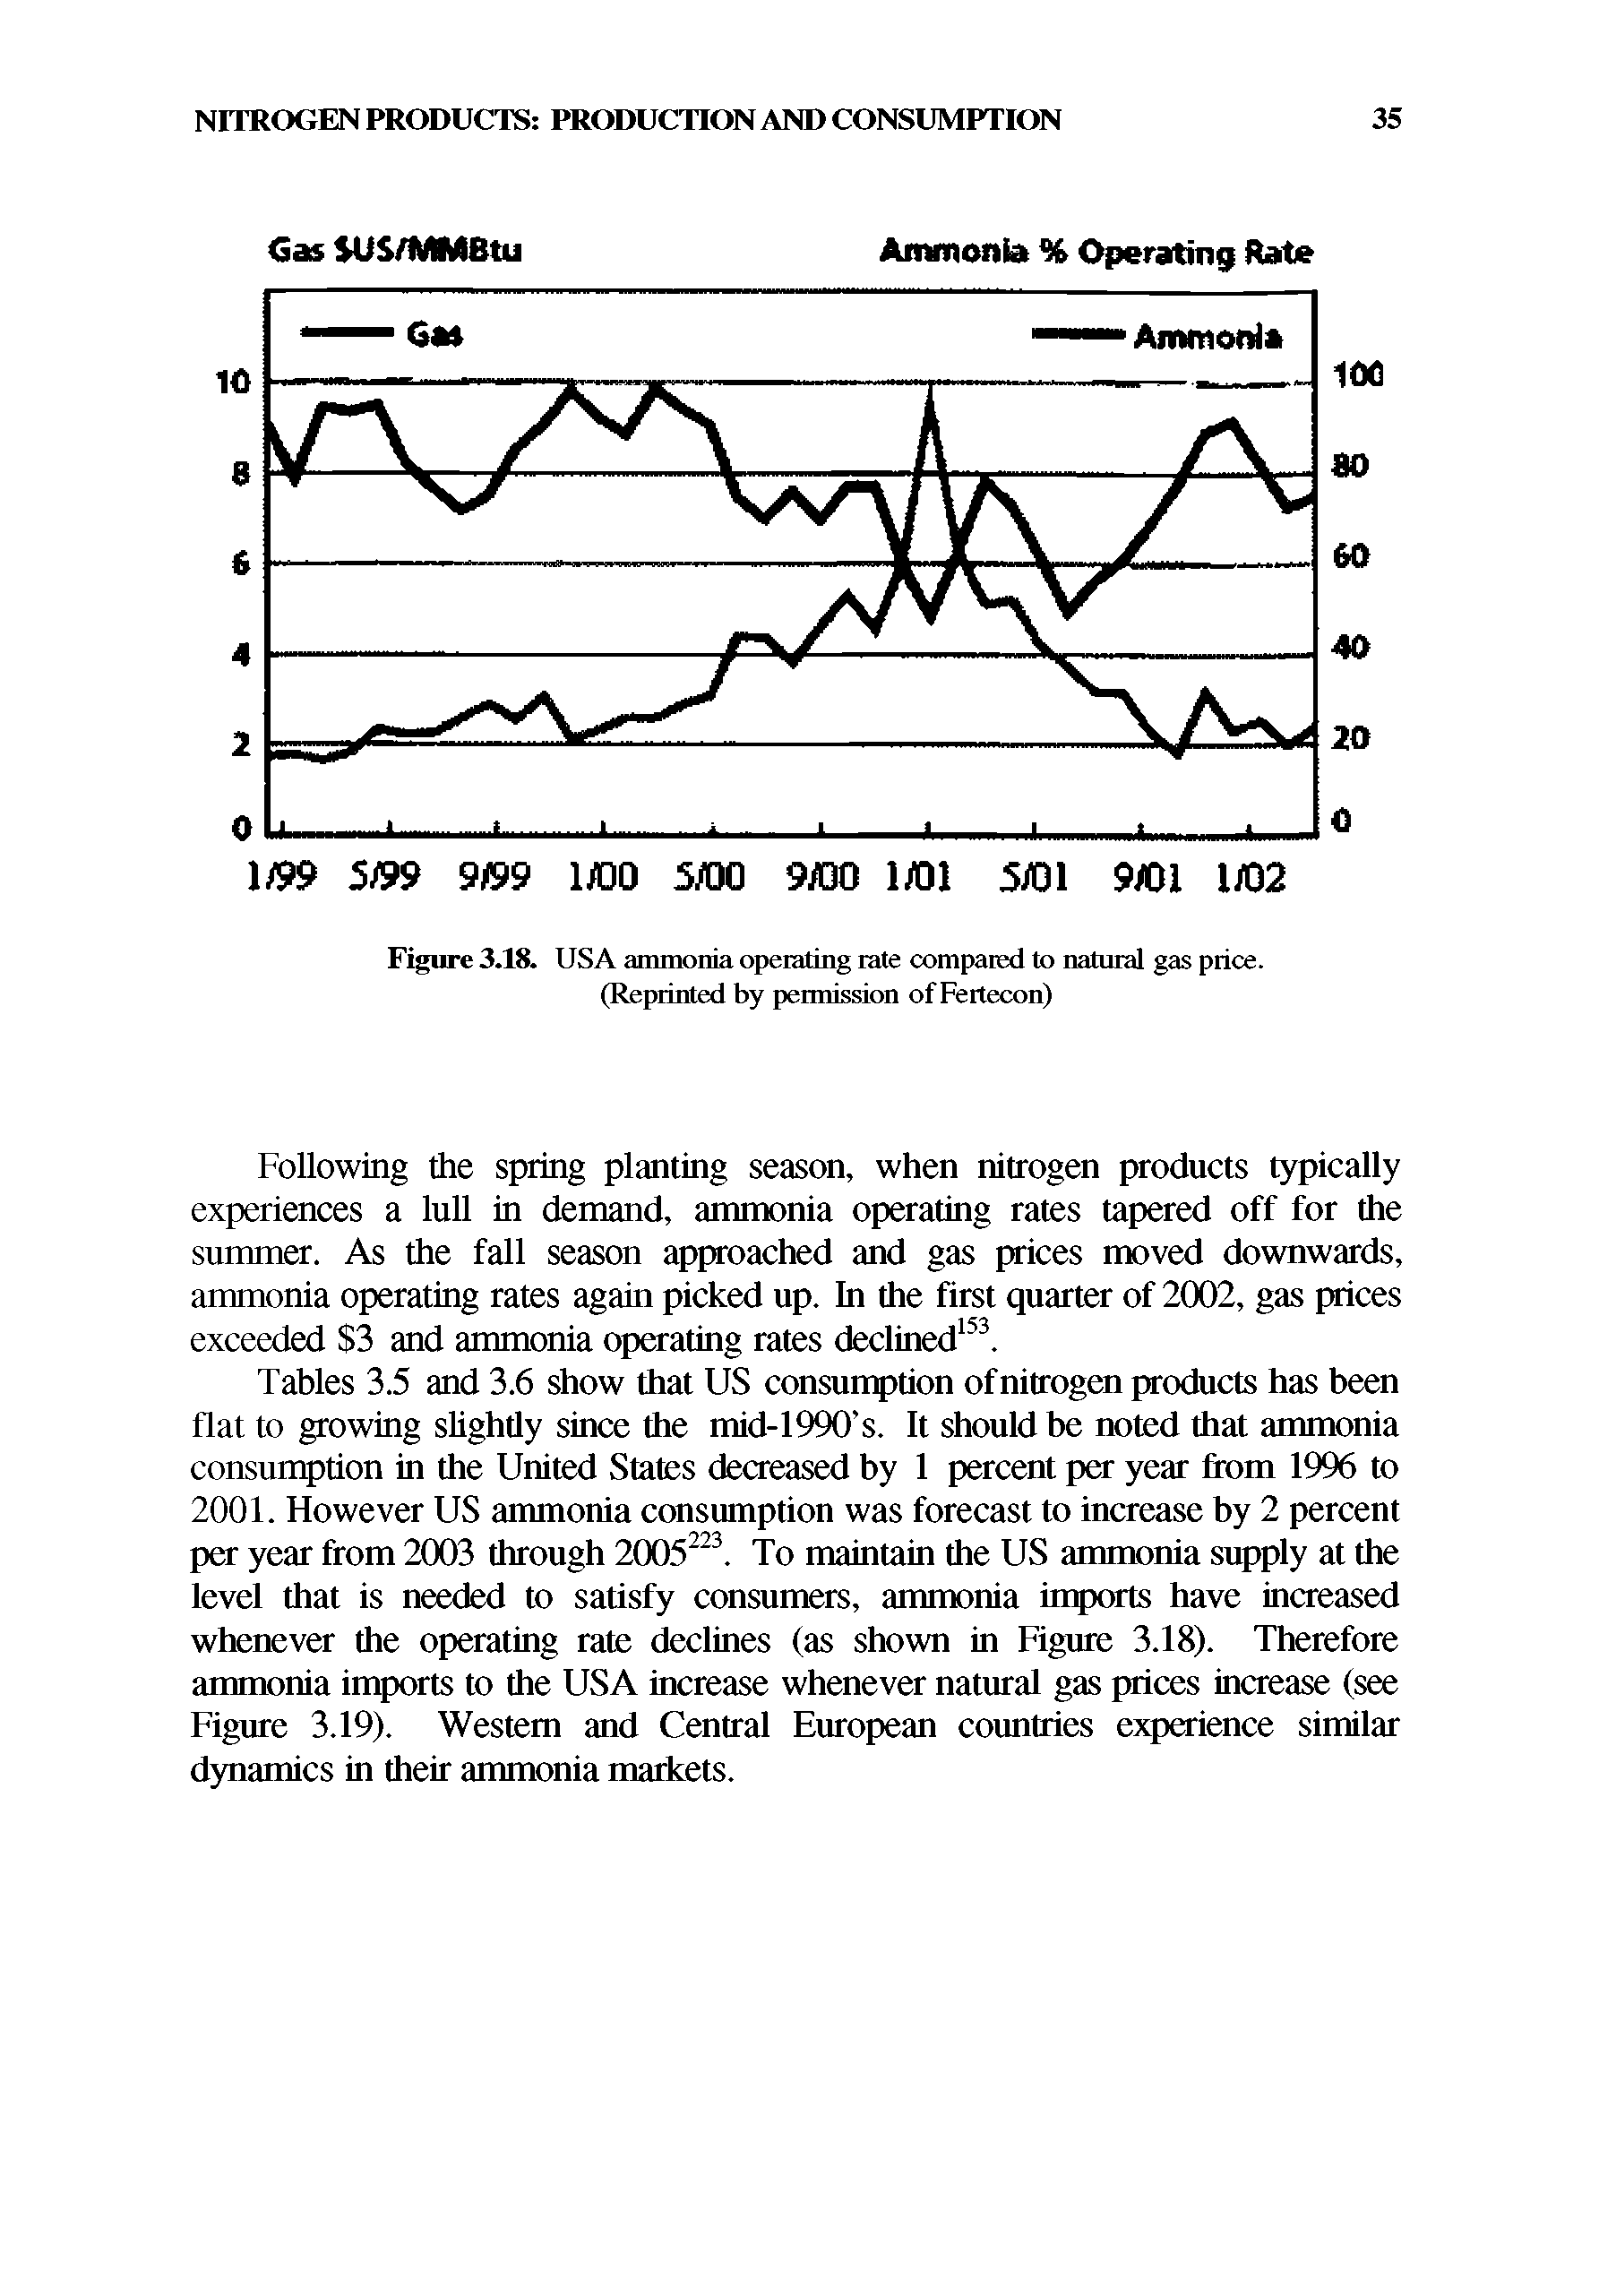 Tables 3.5 and 3.6 show that US consumption of nitrogen products has been flat to growing slightly since the mid-1990 s. It should be noted that ammonia consumption in the United States decreased by 1 percent per year from 1996 to 2001. However US ammonia consumption was forecast to increase by 2 percent per year from 2003 through 2005223. To maintain the US ammonia supply at the level that is needed to satisfy consumers, ammonia imports have increased whenever the operating rate declines (as shown in Figure 3.18). Therefore ammonia imports to the USA increase whenever natural gas prices increase (see Figure 3.19). Western and Central European countries experience similar dynamics in their ammonia markets.